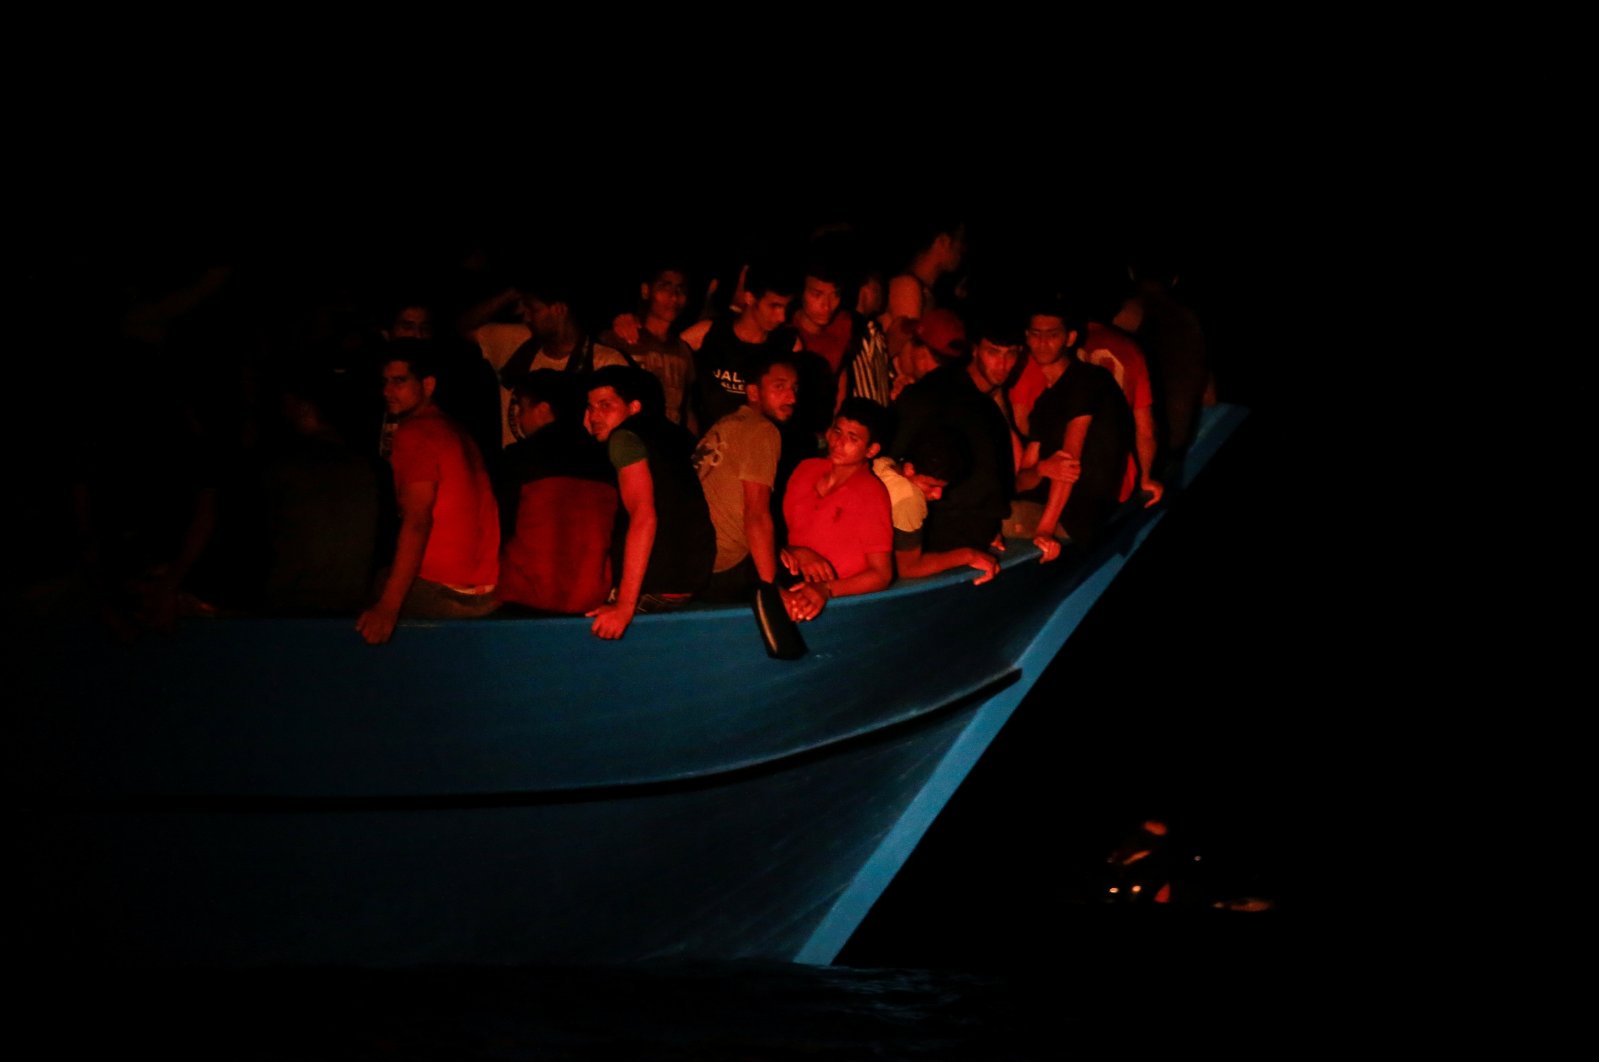 394 migrants withdrew from dangerously overcrowded